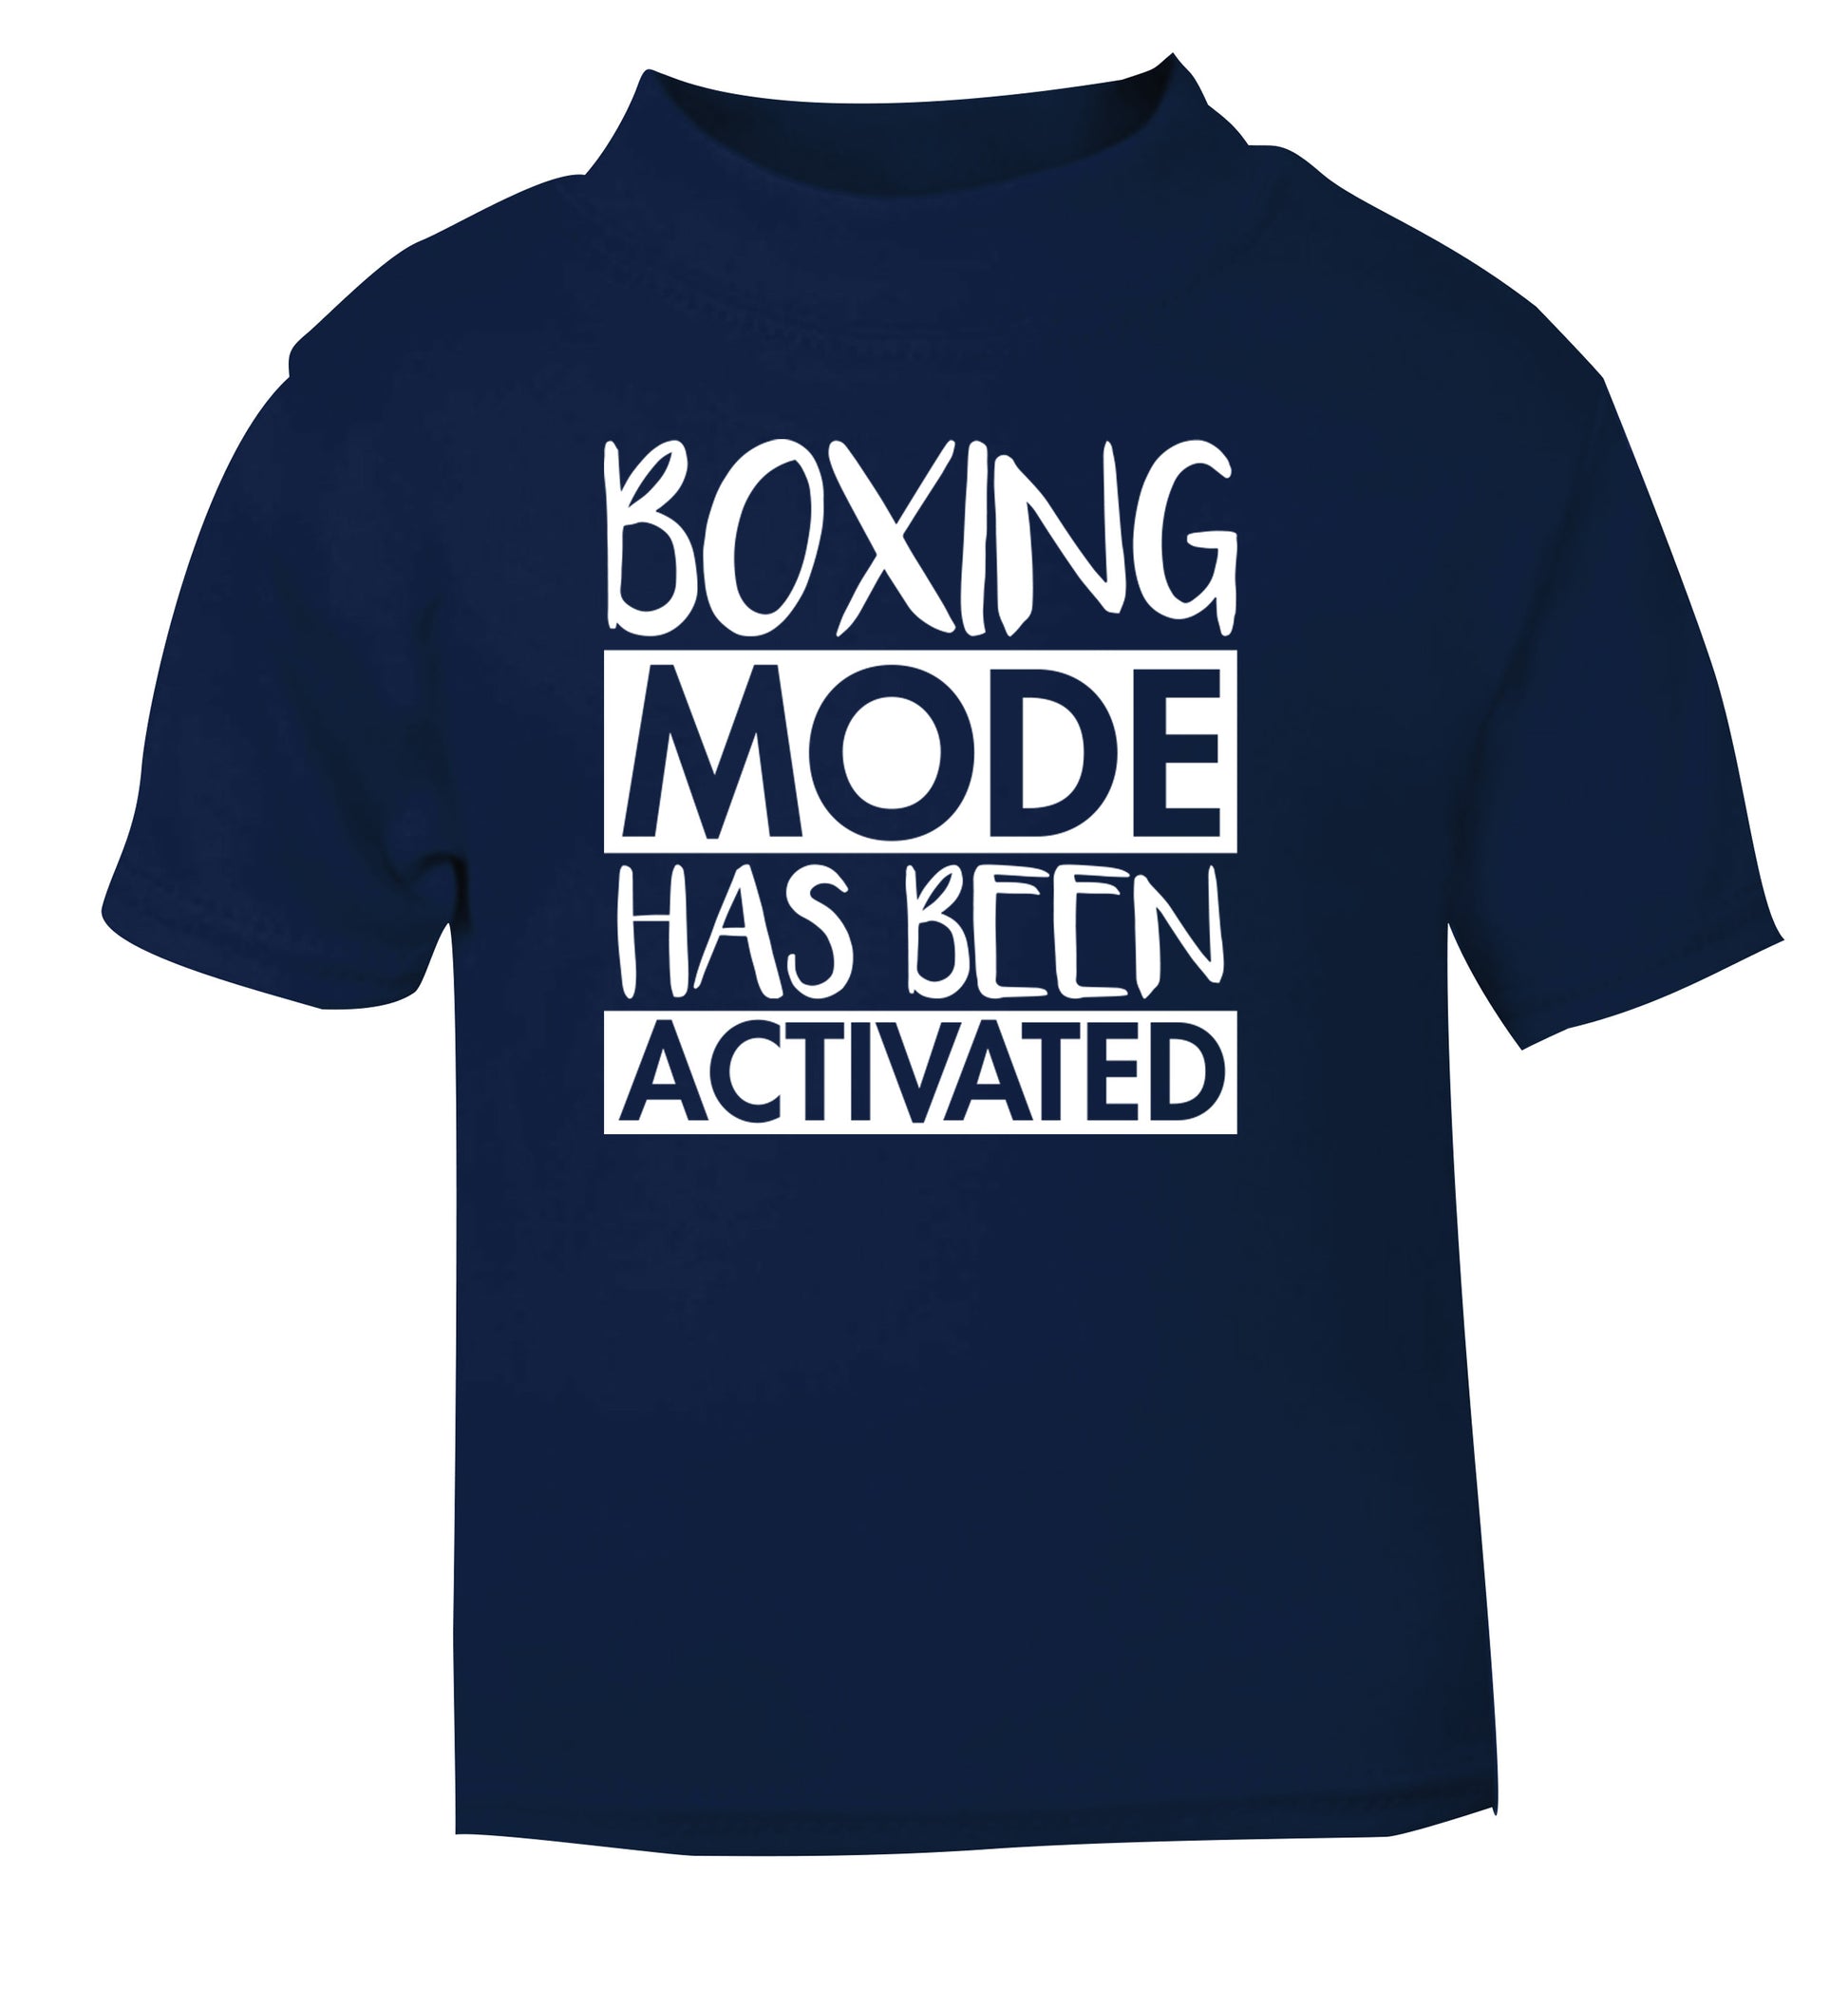 Boxing mode activated navy Baby Toddler Tshirt 2 Years